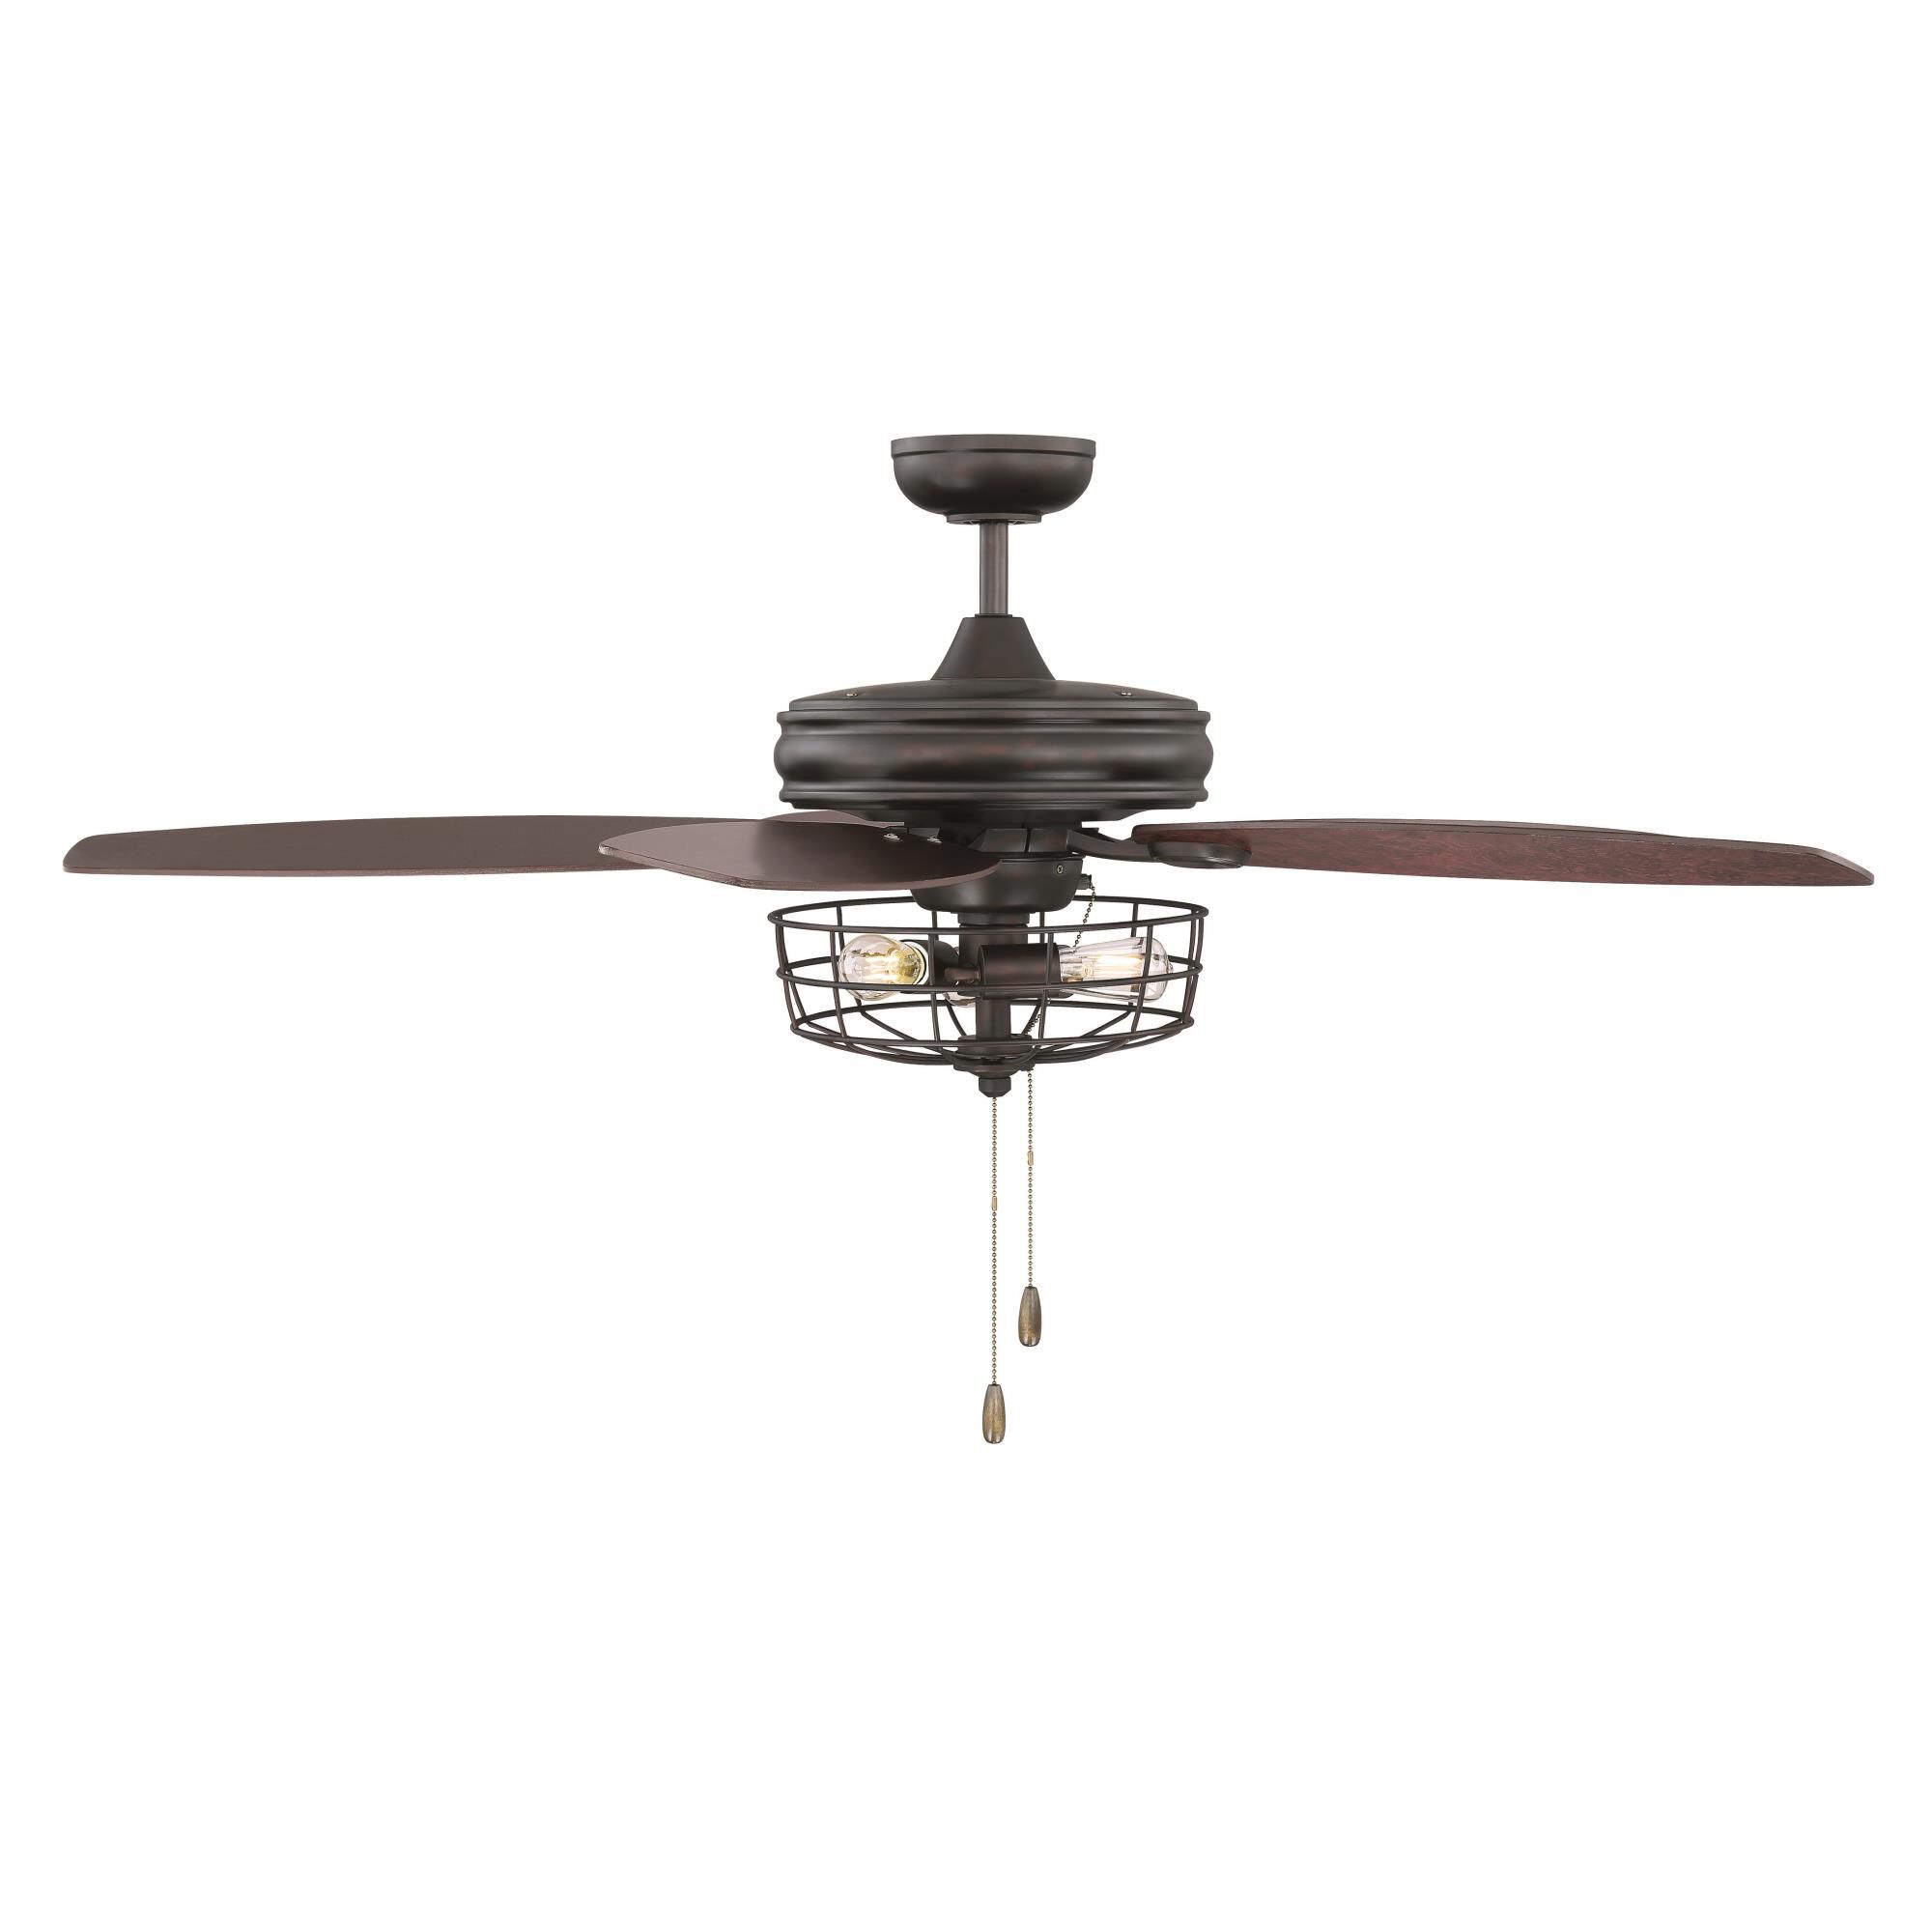 Photos - Fan Meridian Lighting 52 Inch Ceiling  with Light Kit - M2006ORB - Industri